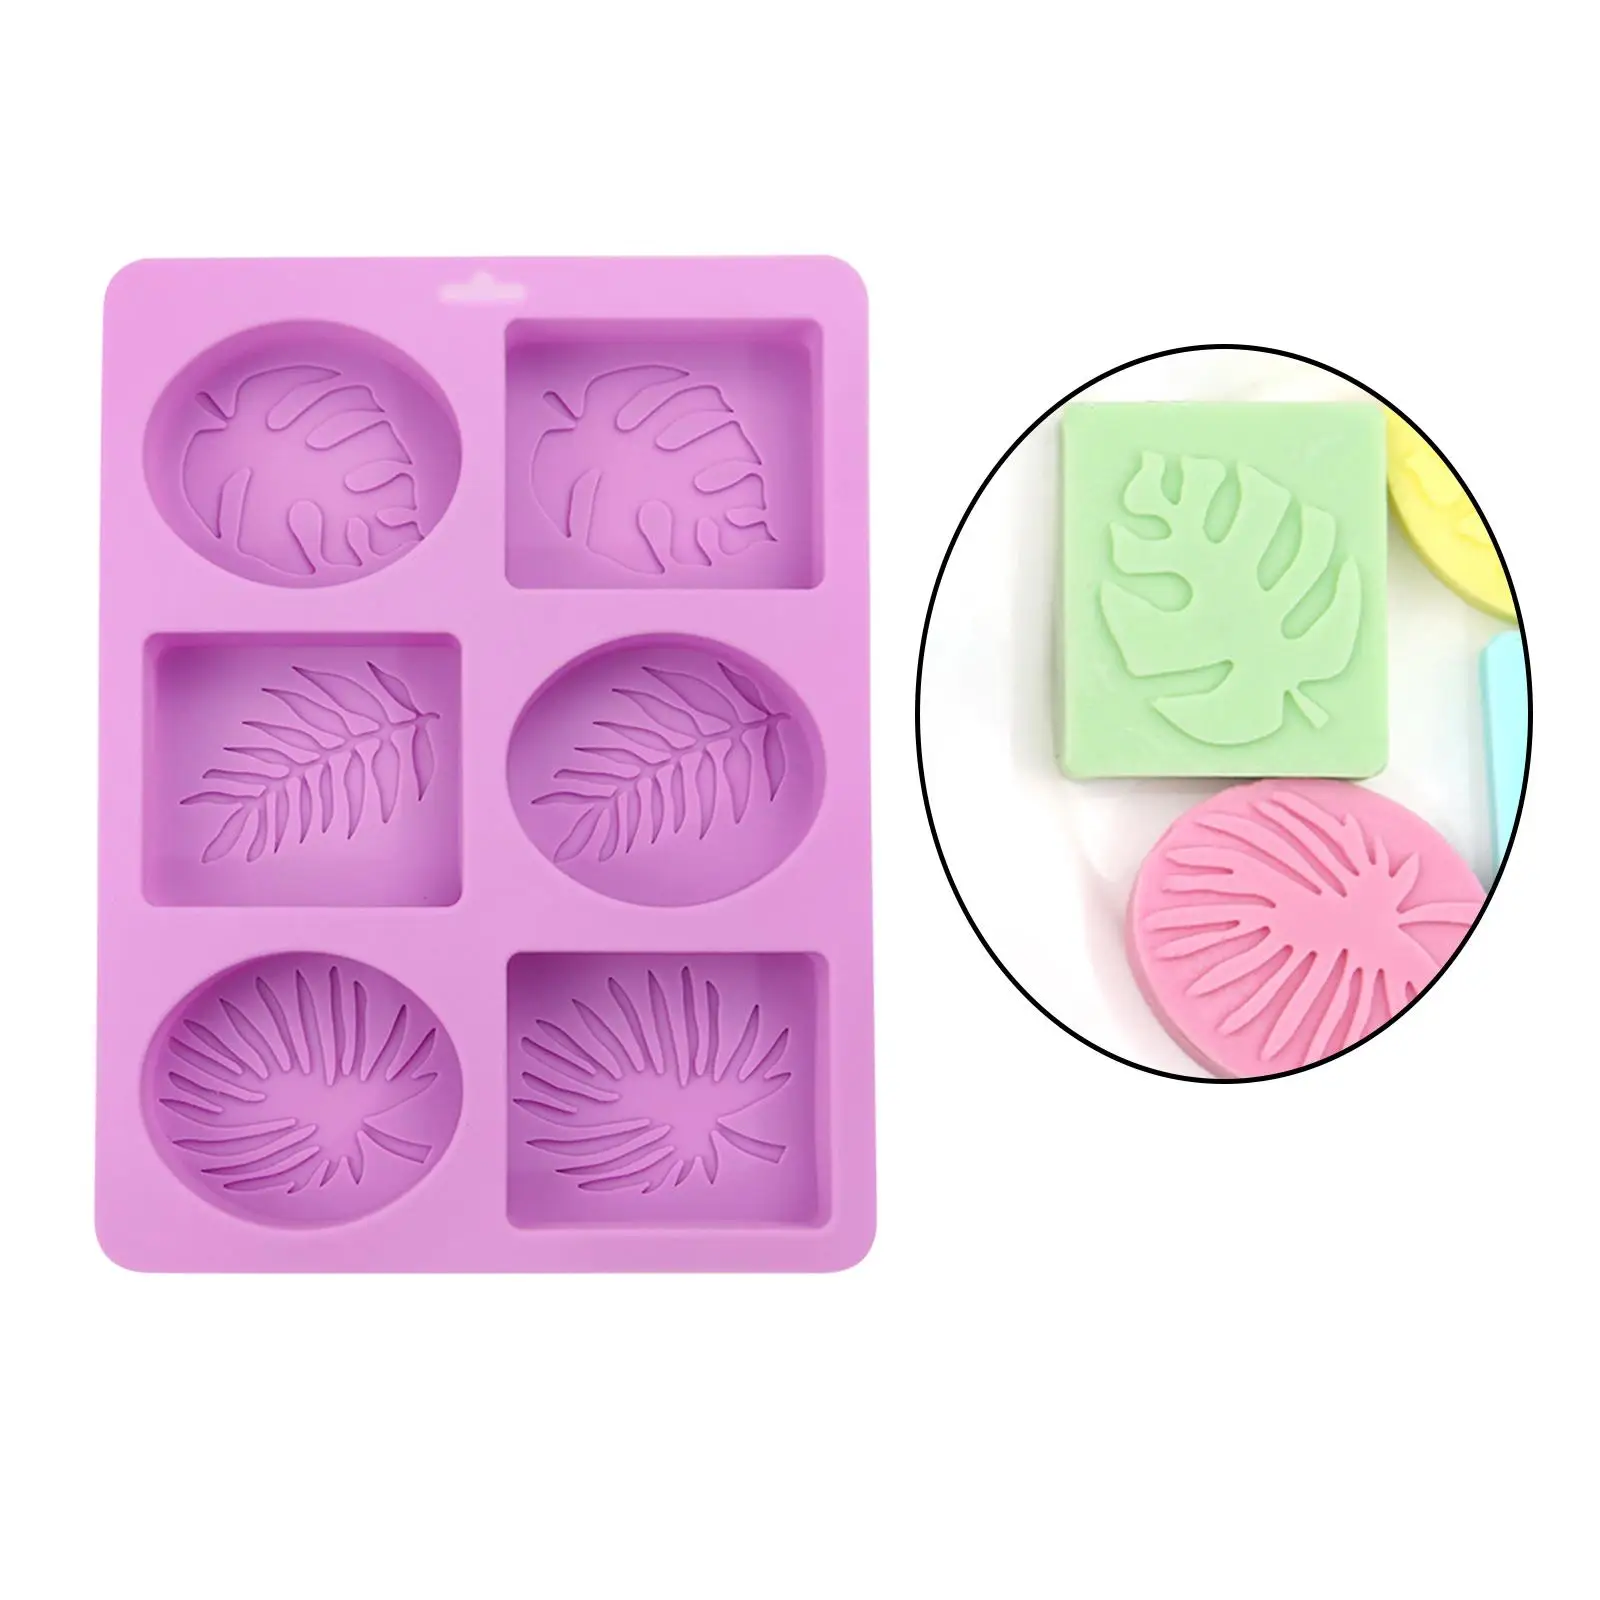 Silicone Soap Molds Handmade Soap Molds 6 Cavities Nonstick Rectangle & Oval for Cake Baking Pudding Soap Making Biscuit Muffin